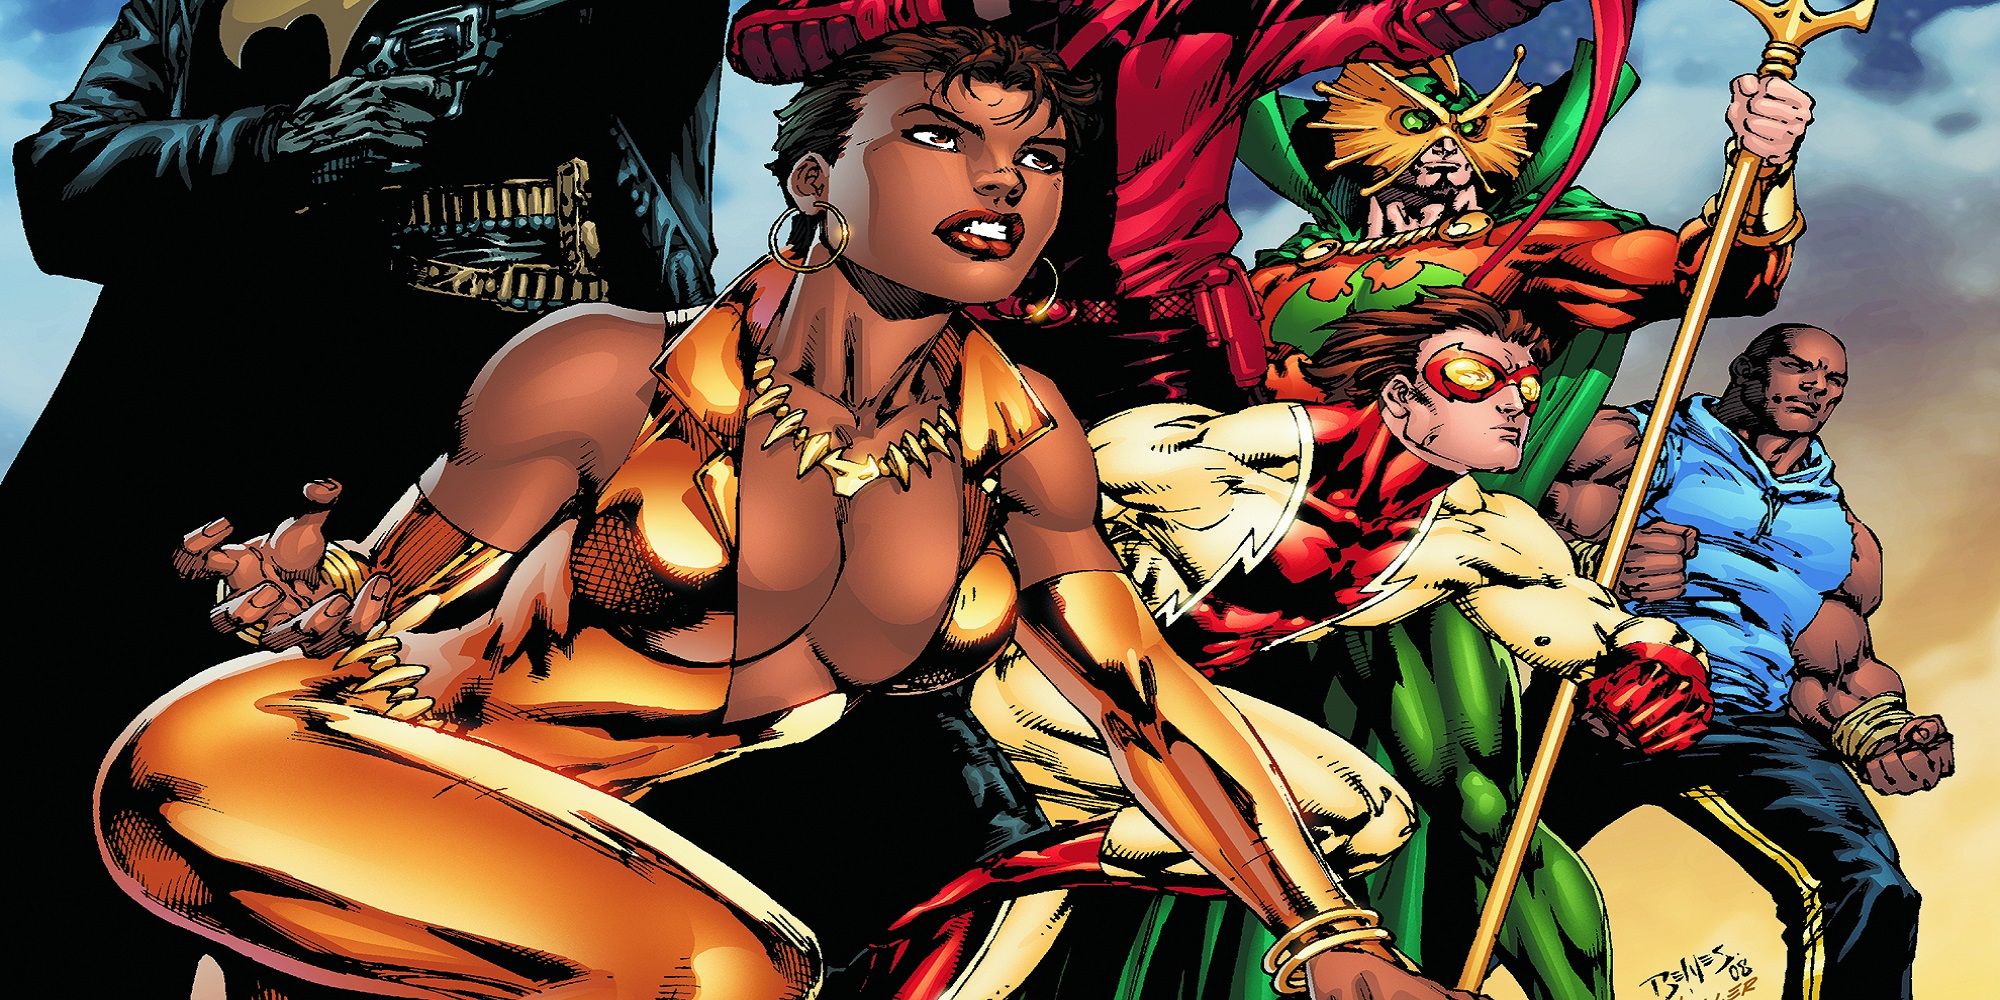 An image of McDuffie's Justice League, featuring Vixen, Impulse, and other DC Comics characters